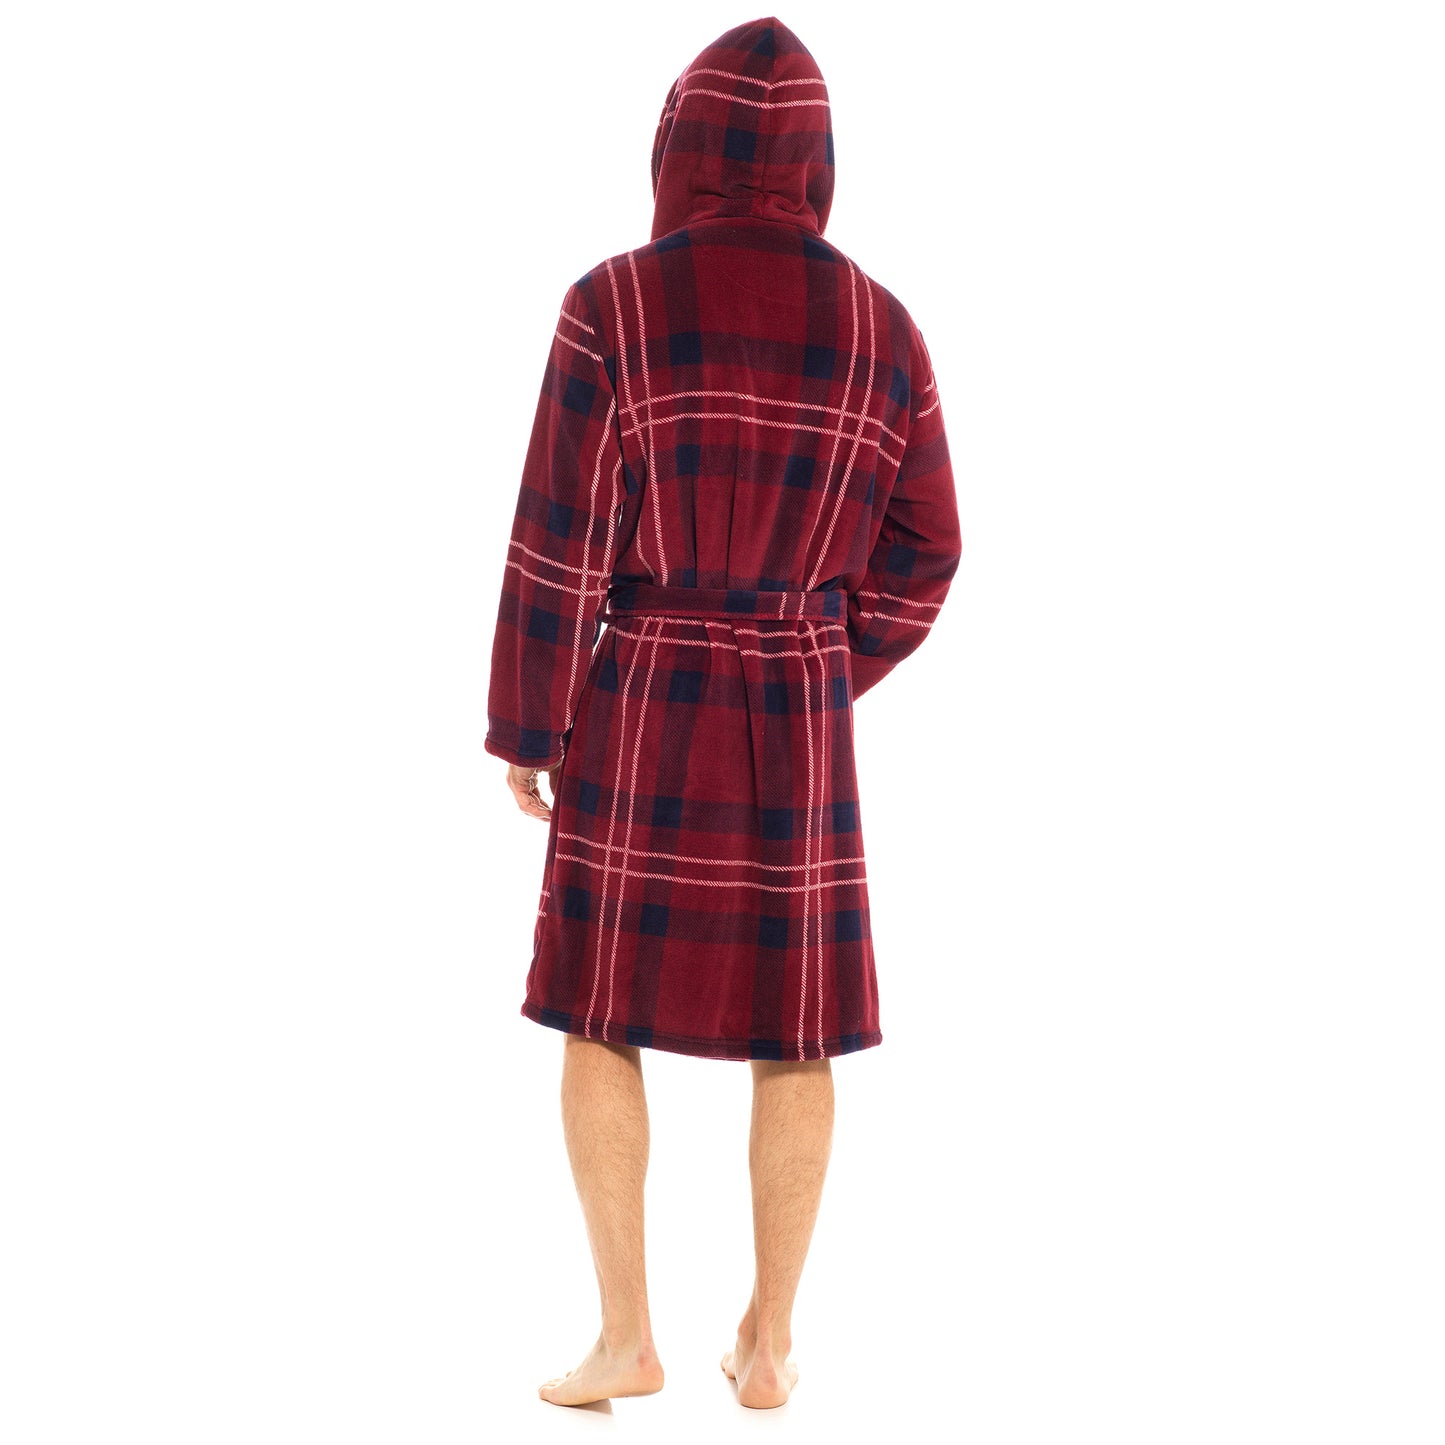 Men's Coral Fleece Tartan Checked Hooded Robe Dressing Gown